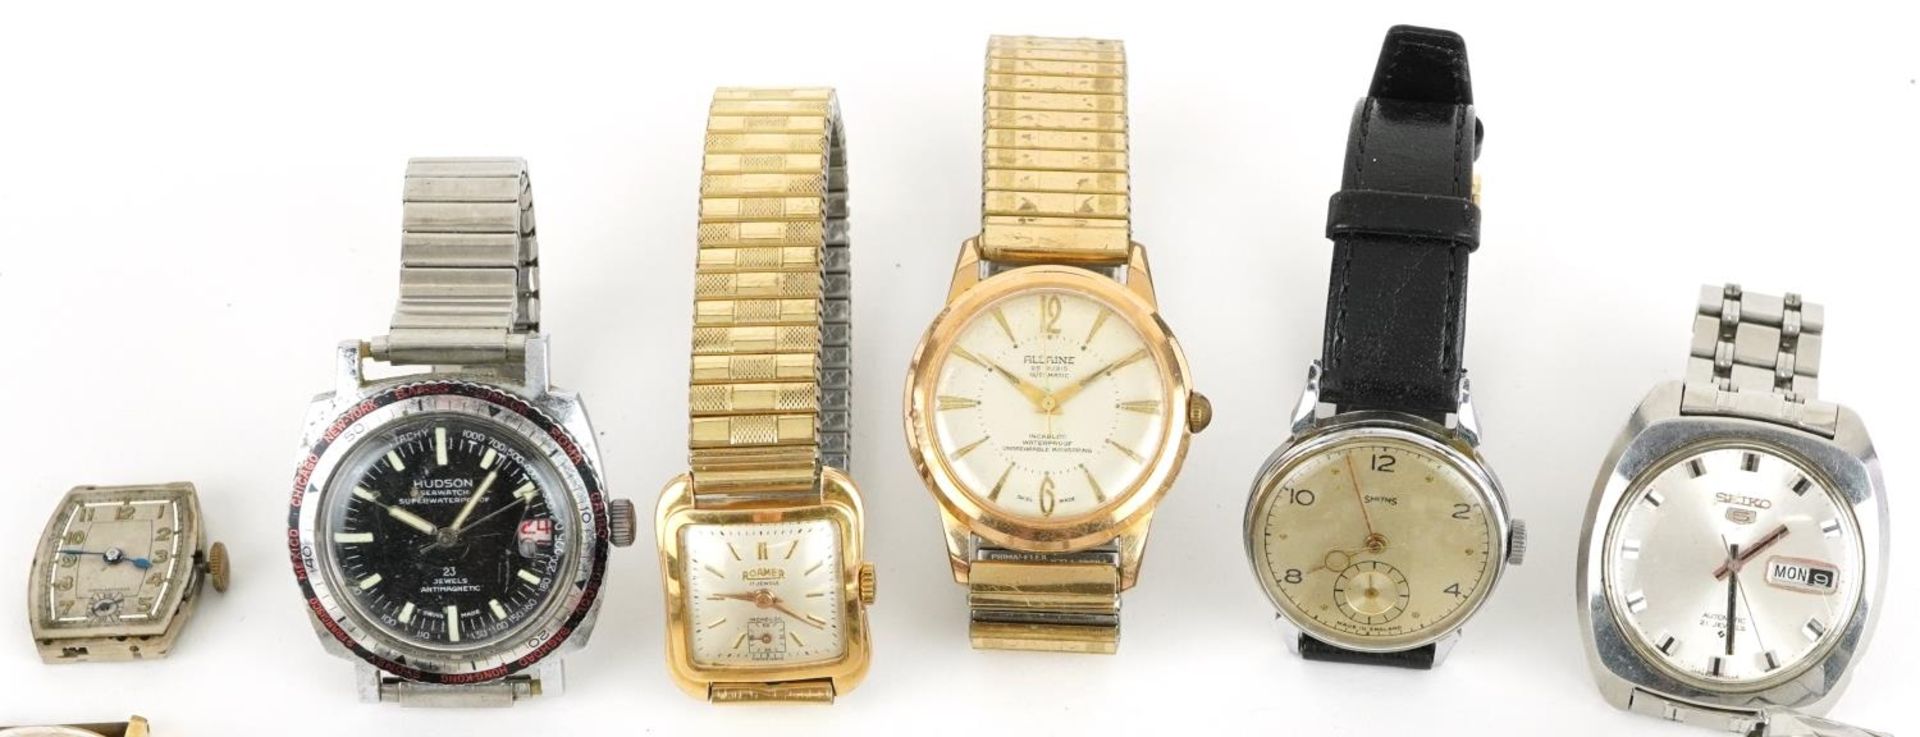 Fourteen vintage gentlemen's wristwatches and a watch movement including Hudson Seawatch, Smiths, - Image 2 of 4